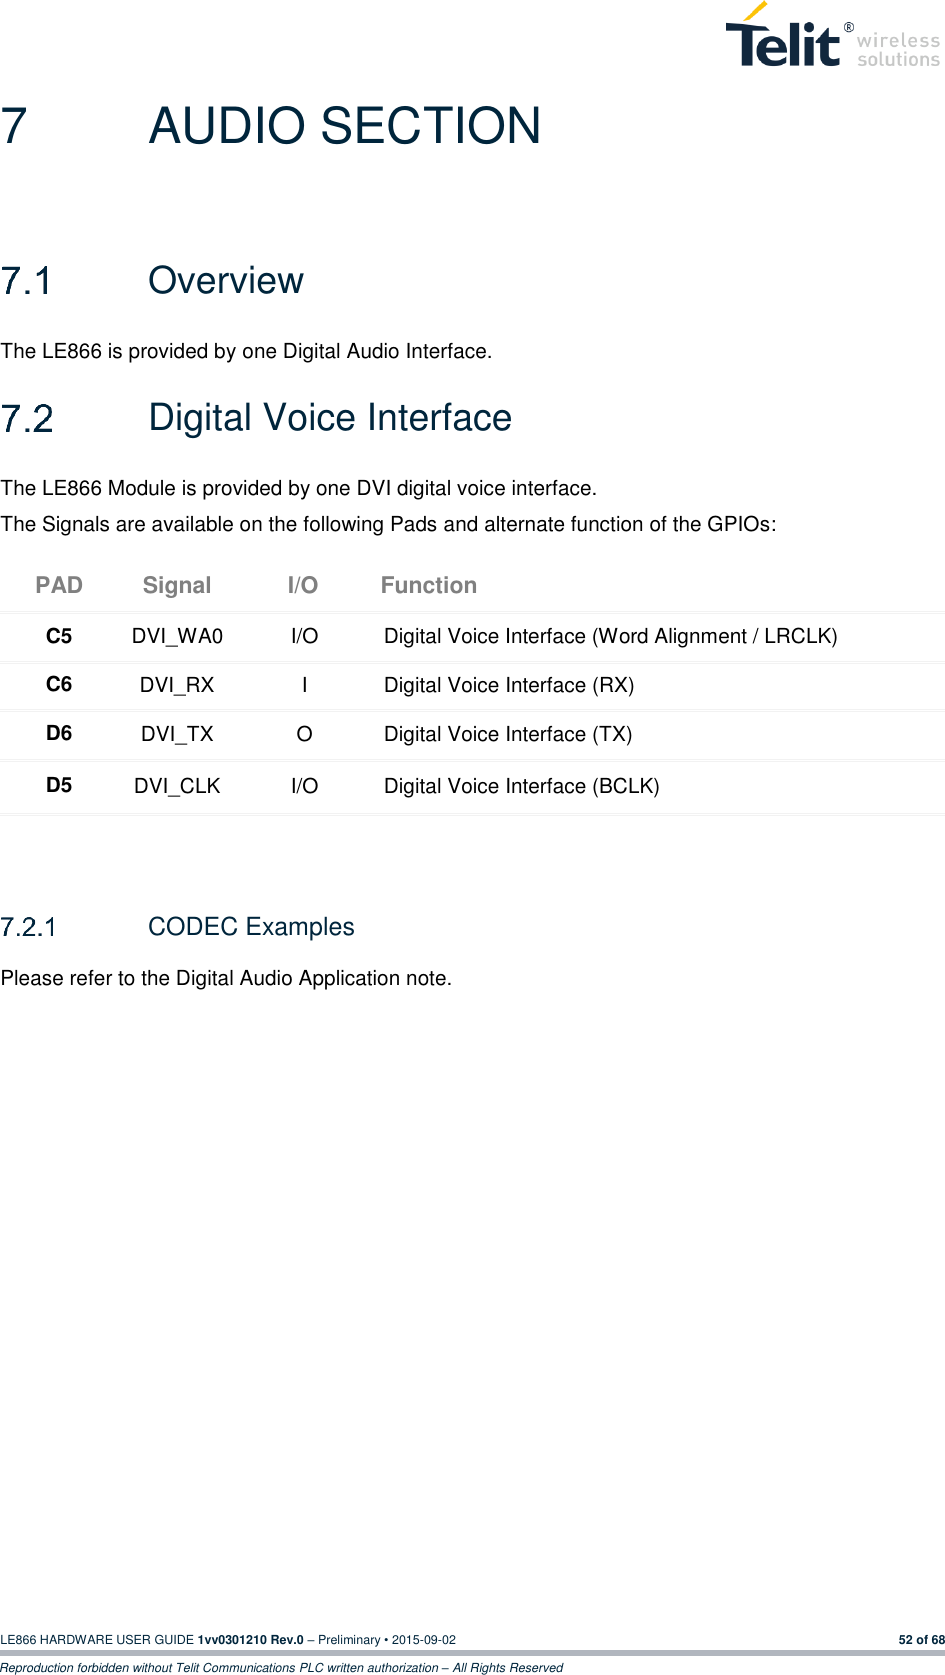  LE866 HARDWARE USER GUIDE 1vv0301210 Rev.0 – Preliminary • 2015-09-02 52 of 68 Reproduction forbidden without Telit Communications PLC written authorization – All Rights Reserved 7  AUDIO SECTION   Overview The LE866 is provided by one Digital Audio Interface.   Digital Voice Interface The LE866 Module is provided by one DVI digital voice interface. The Signals are available on the following Pads and alternate function of the GPIOs: PAD Signal I/O Function C5 DVI_WA0 I/O Digital Voice Interface (Word Alignment / LRCLK) C6 DVI_RX I Digital Voice Interface (RX) D6 DVI_TX O Digital Voice Interface (TX) D5 DVI_CLK I/O Digital Voice Interface (BCLK)     CODEC Examples Please refer to the Digital Audio Application note.  